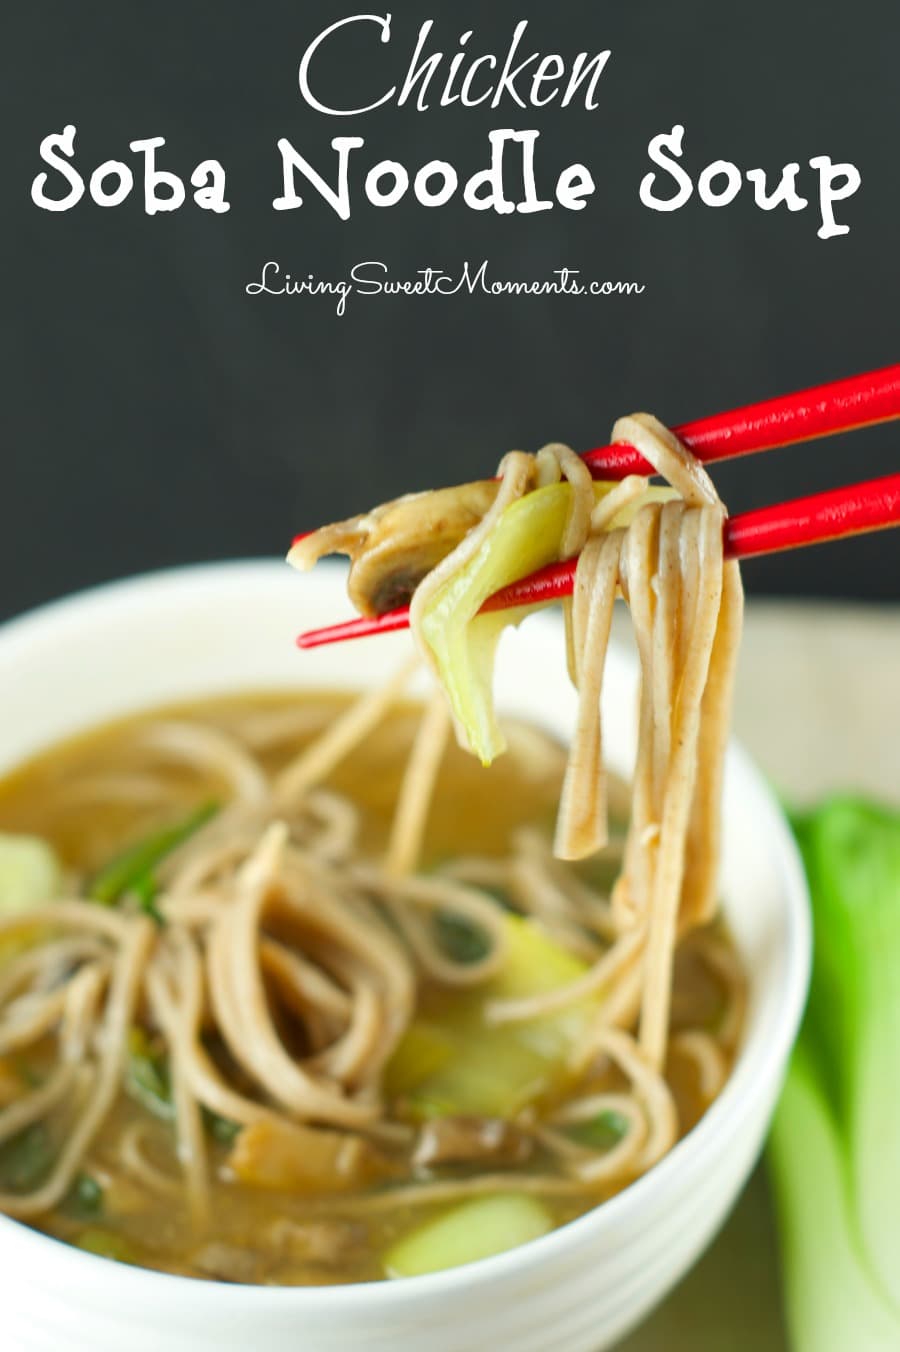 Chicken Soba Noodle Soup - Easy to make and delicious! A flavorful broth is served with soba noodles, chicken, bok choy and mushrooms in a comforting soup that will warm you during chilly nights. 